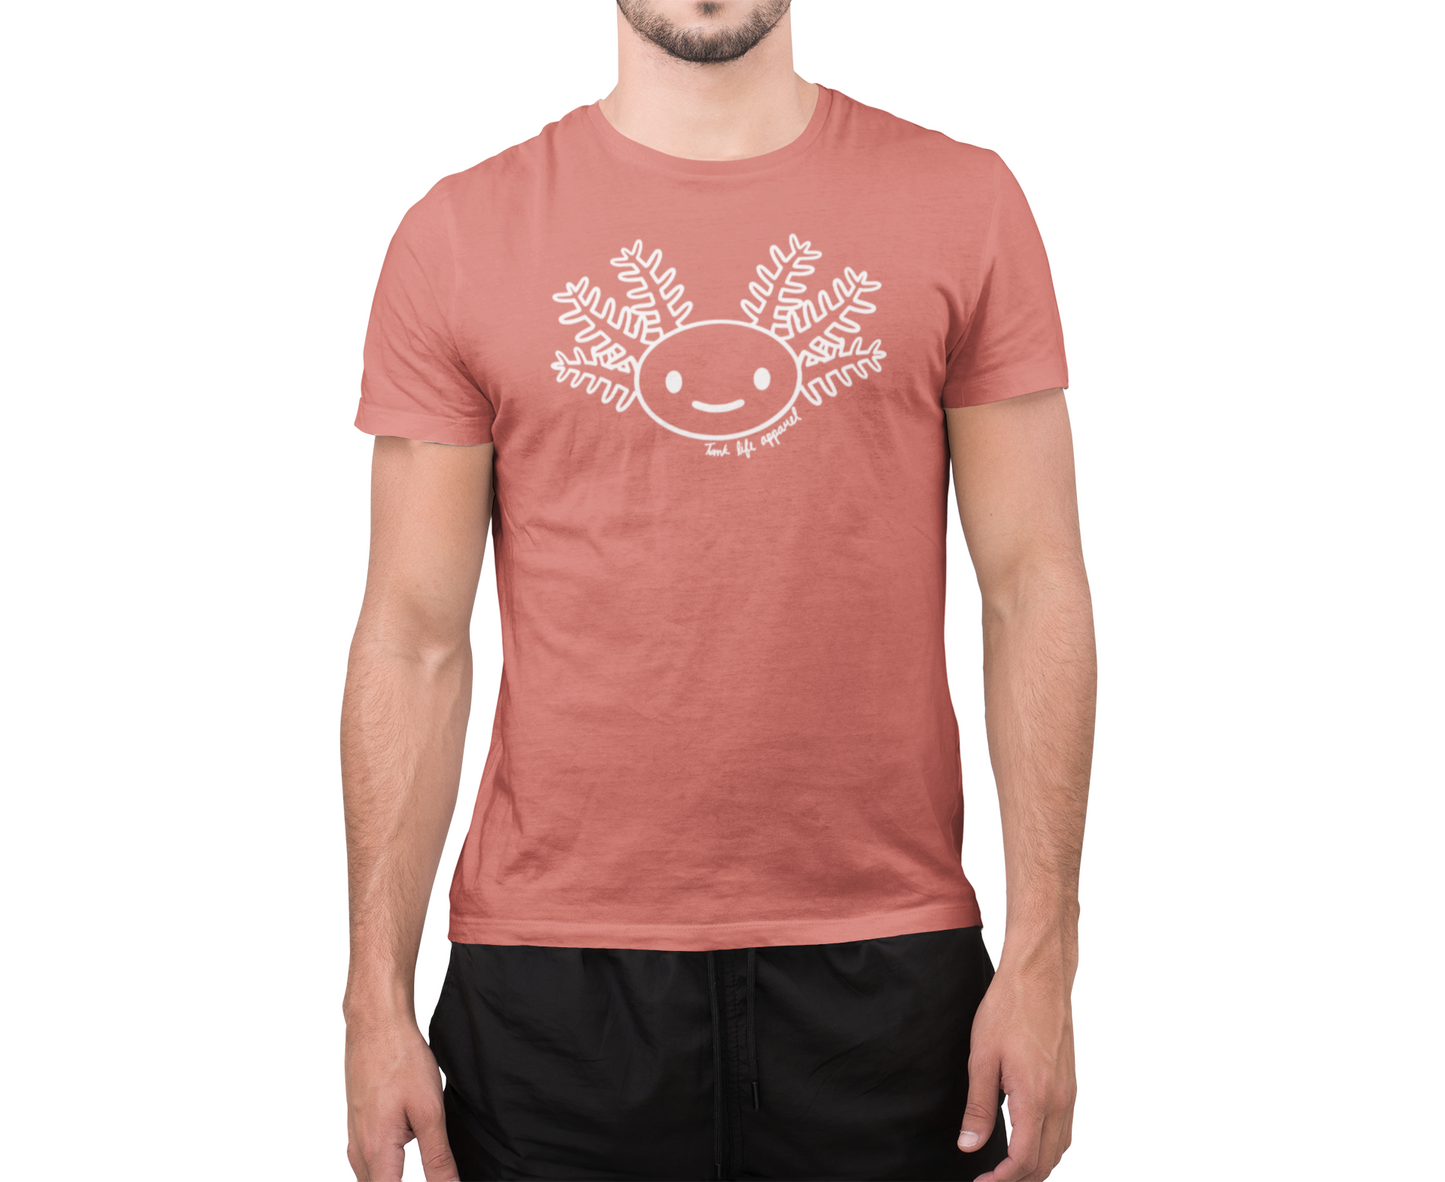 The Tank Life Apparel smiling axolotl design on a classic tee with our custom TLA sleeve label. Adorable axolotl smiling in white lines.